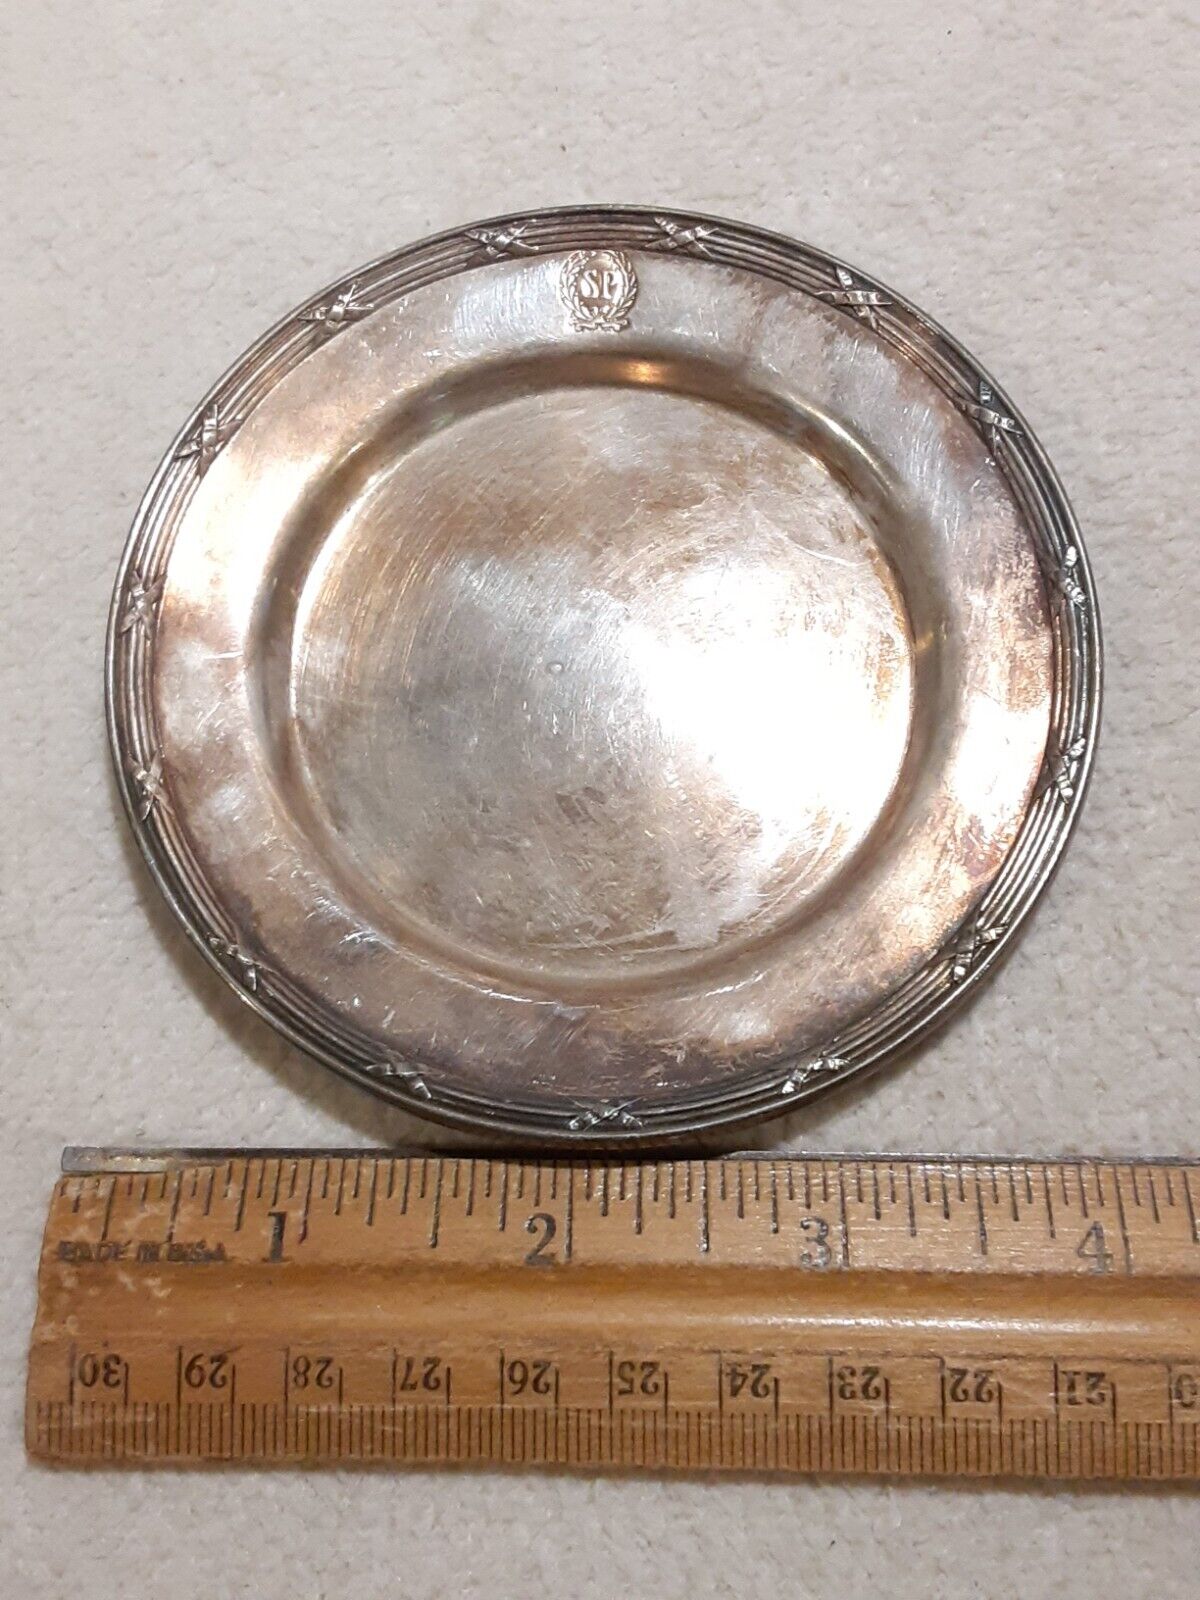 Savoy Plaza Hotel Ware Gorham Ep Silverplate Small Coster Sauser